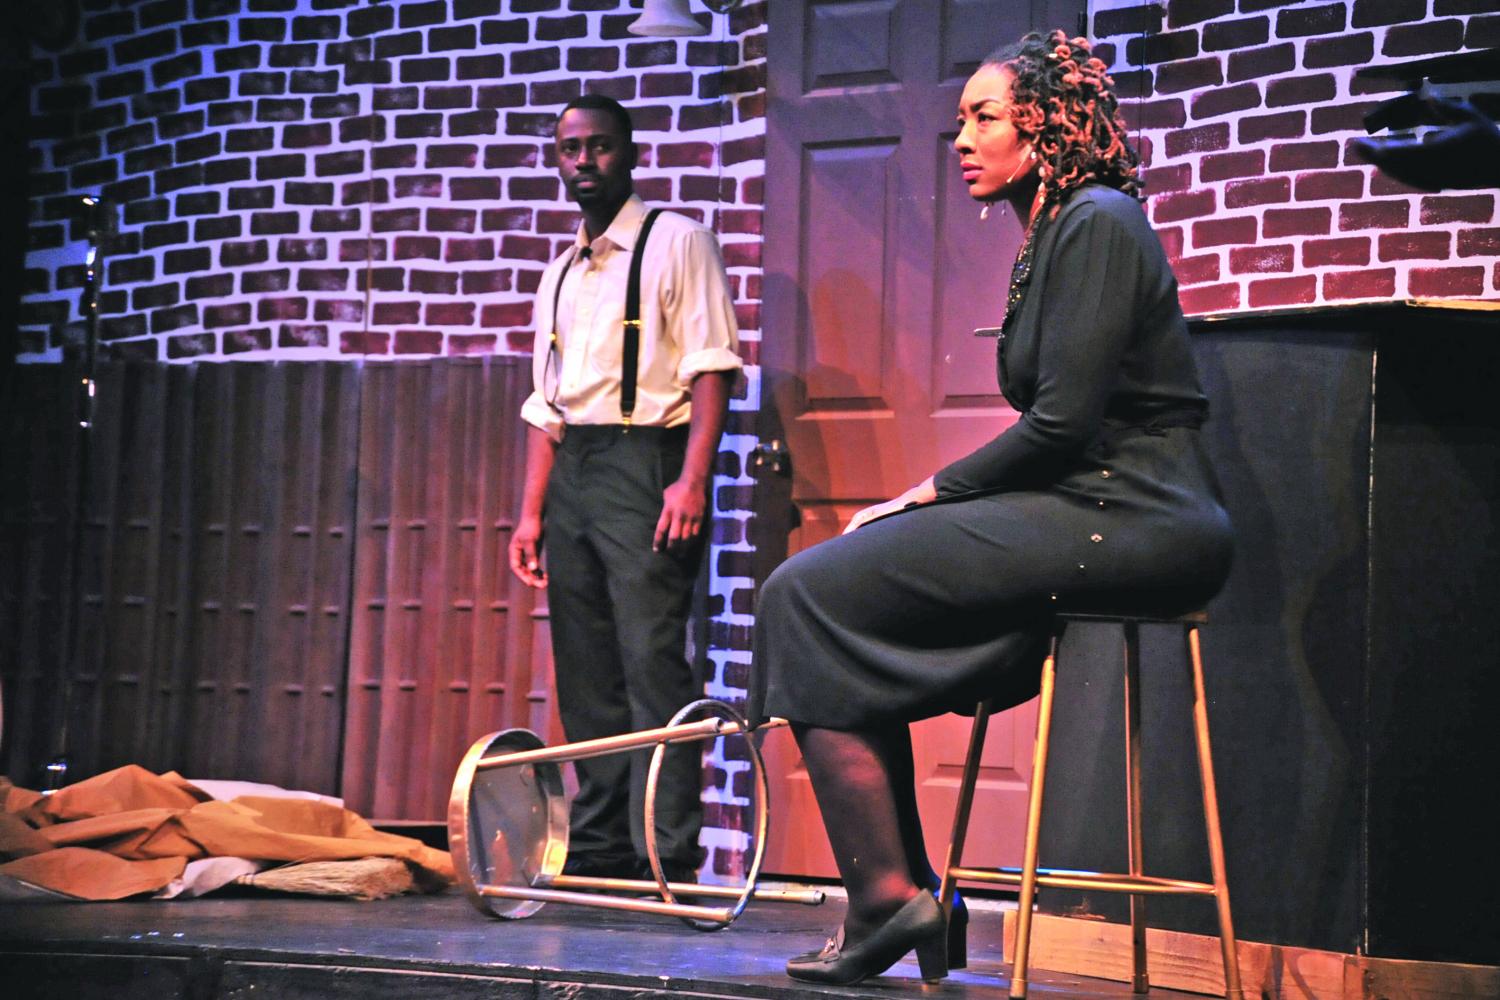 Nya-bingha Zianni (right), portraying Anabelle, looks straight ahead as she sits down after walking into her juke joint, Anabelle’s, during a scene from the 1940s North Richmond- inspired play  “Richmond Renaiss-
ance,” performed in the El Cerrito High School Performing Arts Theater on May 6.